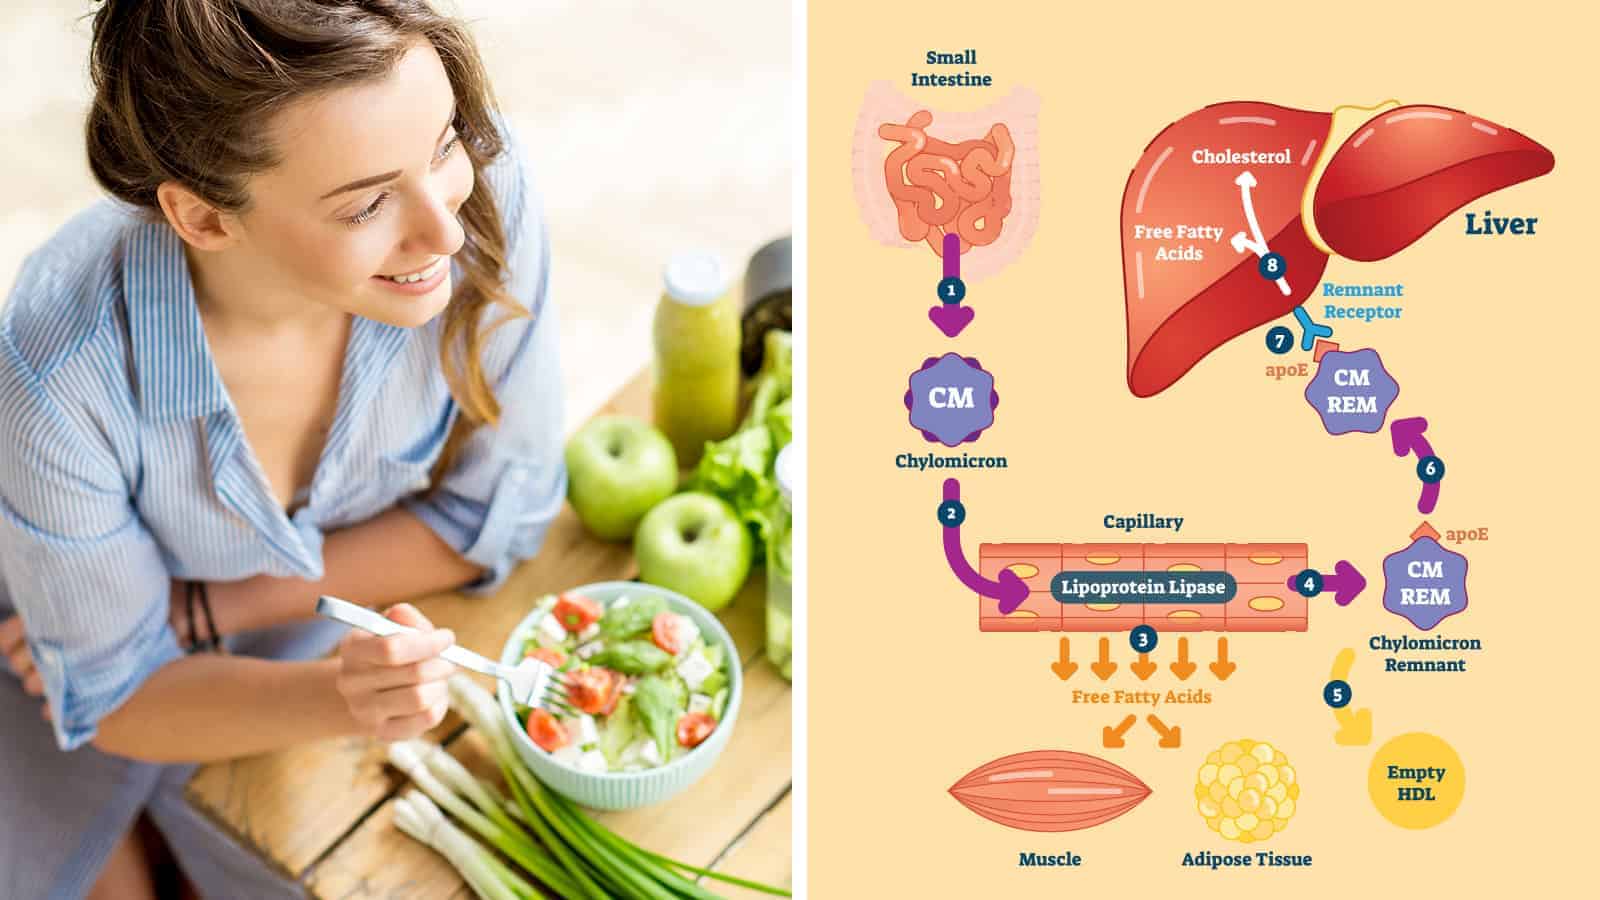 Science Explains How a Healthy Diet is the Best for Metabolism